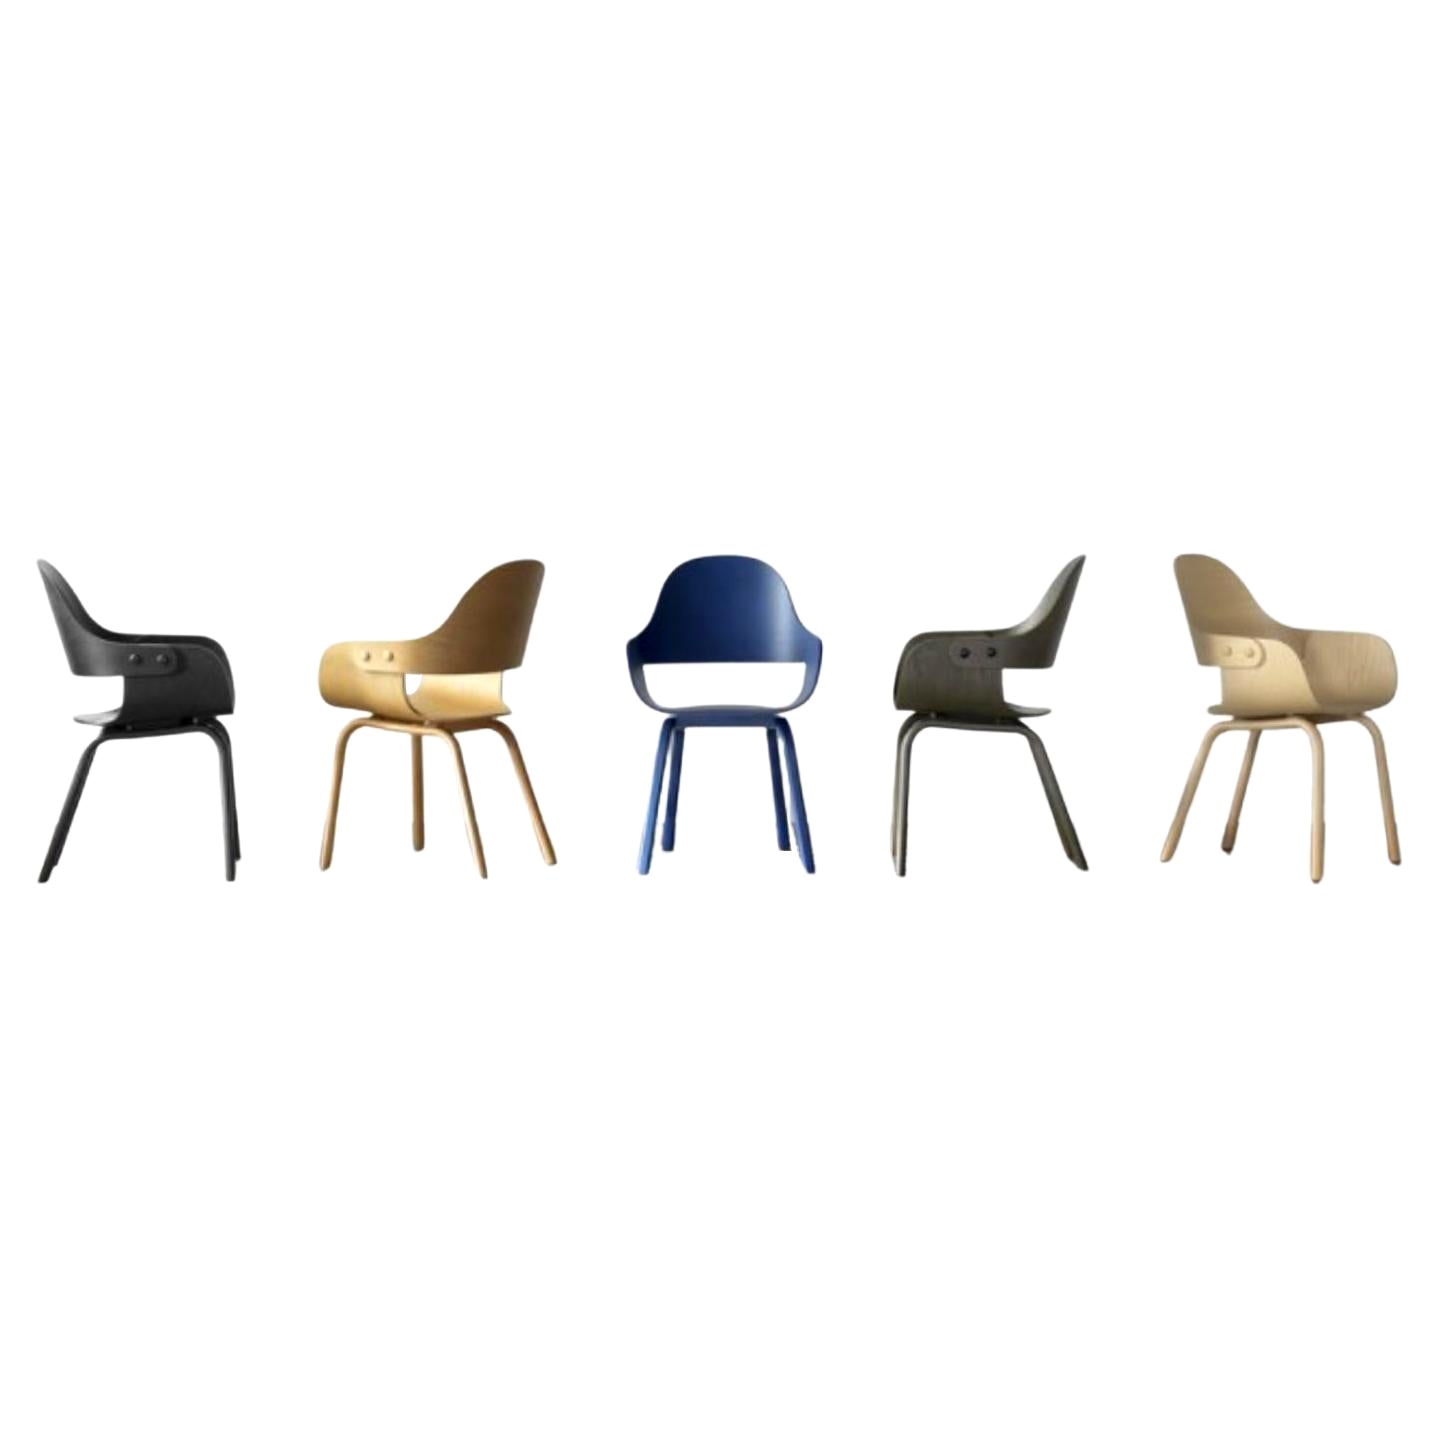 Set of 5 Showtime Nude 4 Legs Chairs by Jaime Hayon For Sale